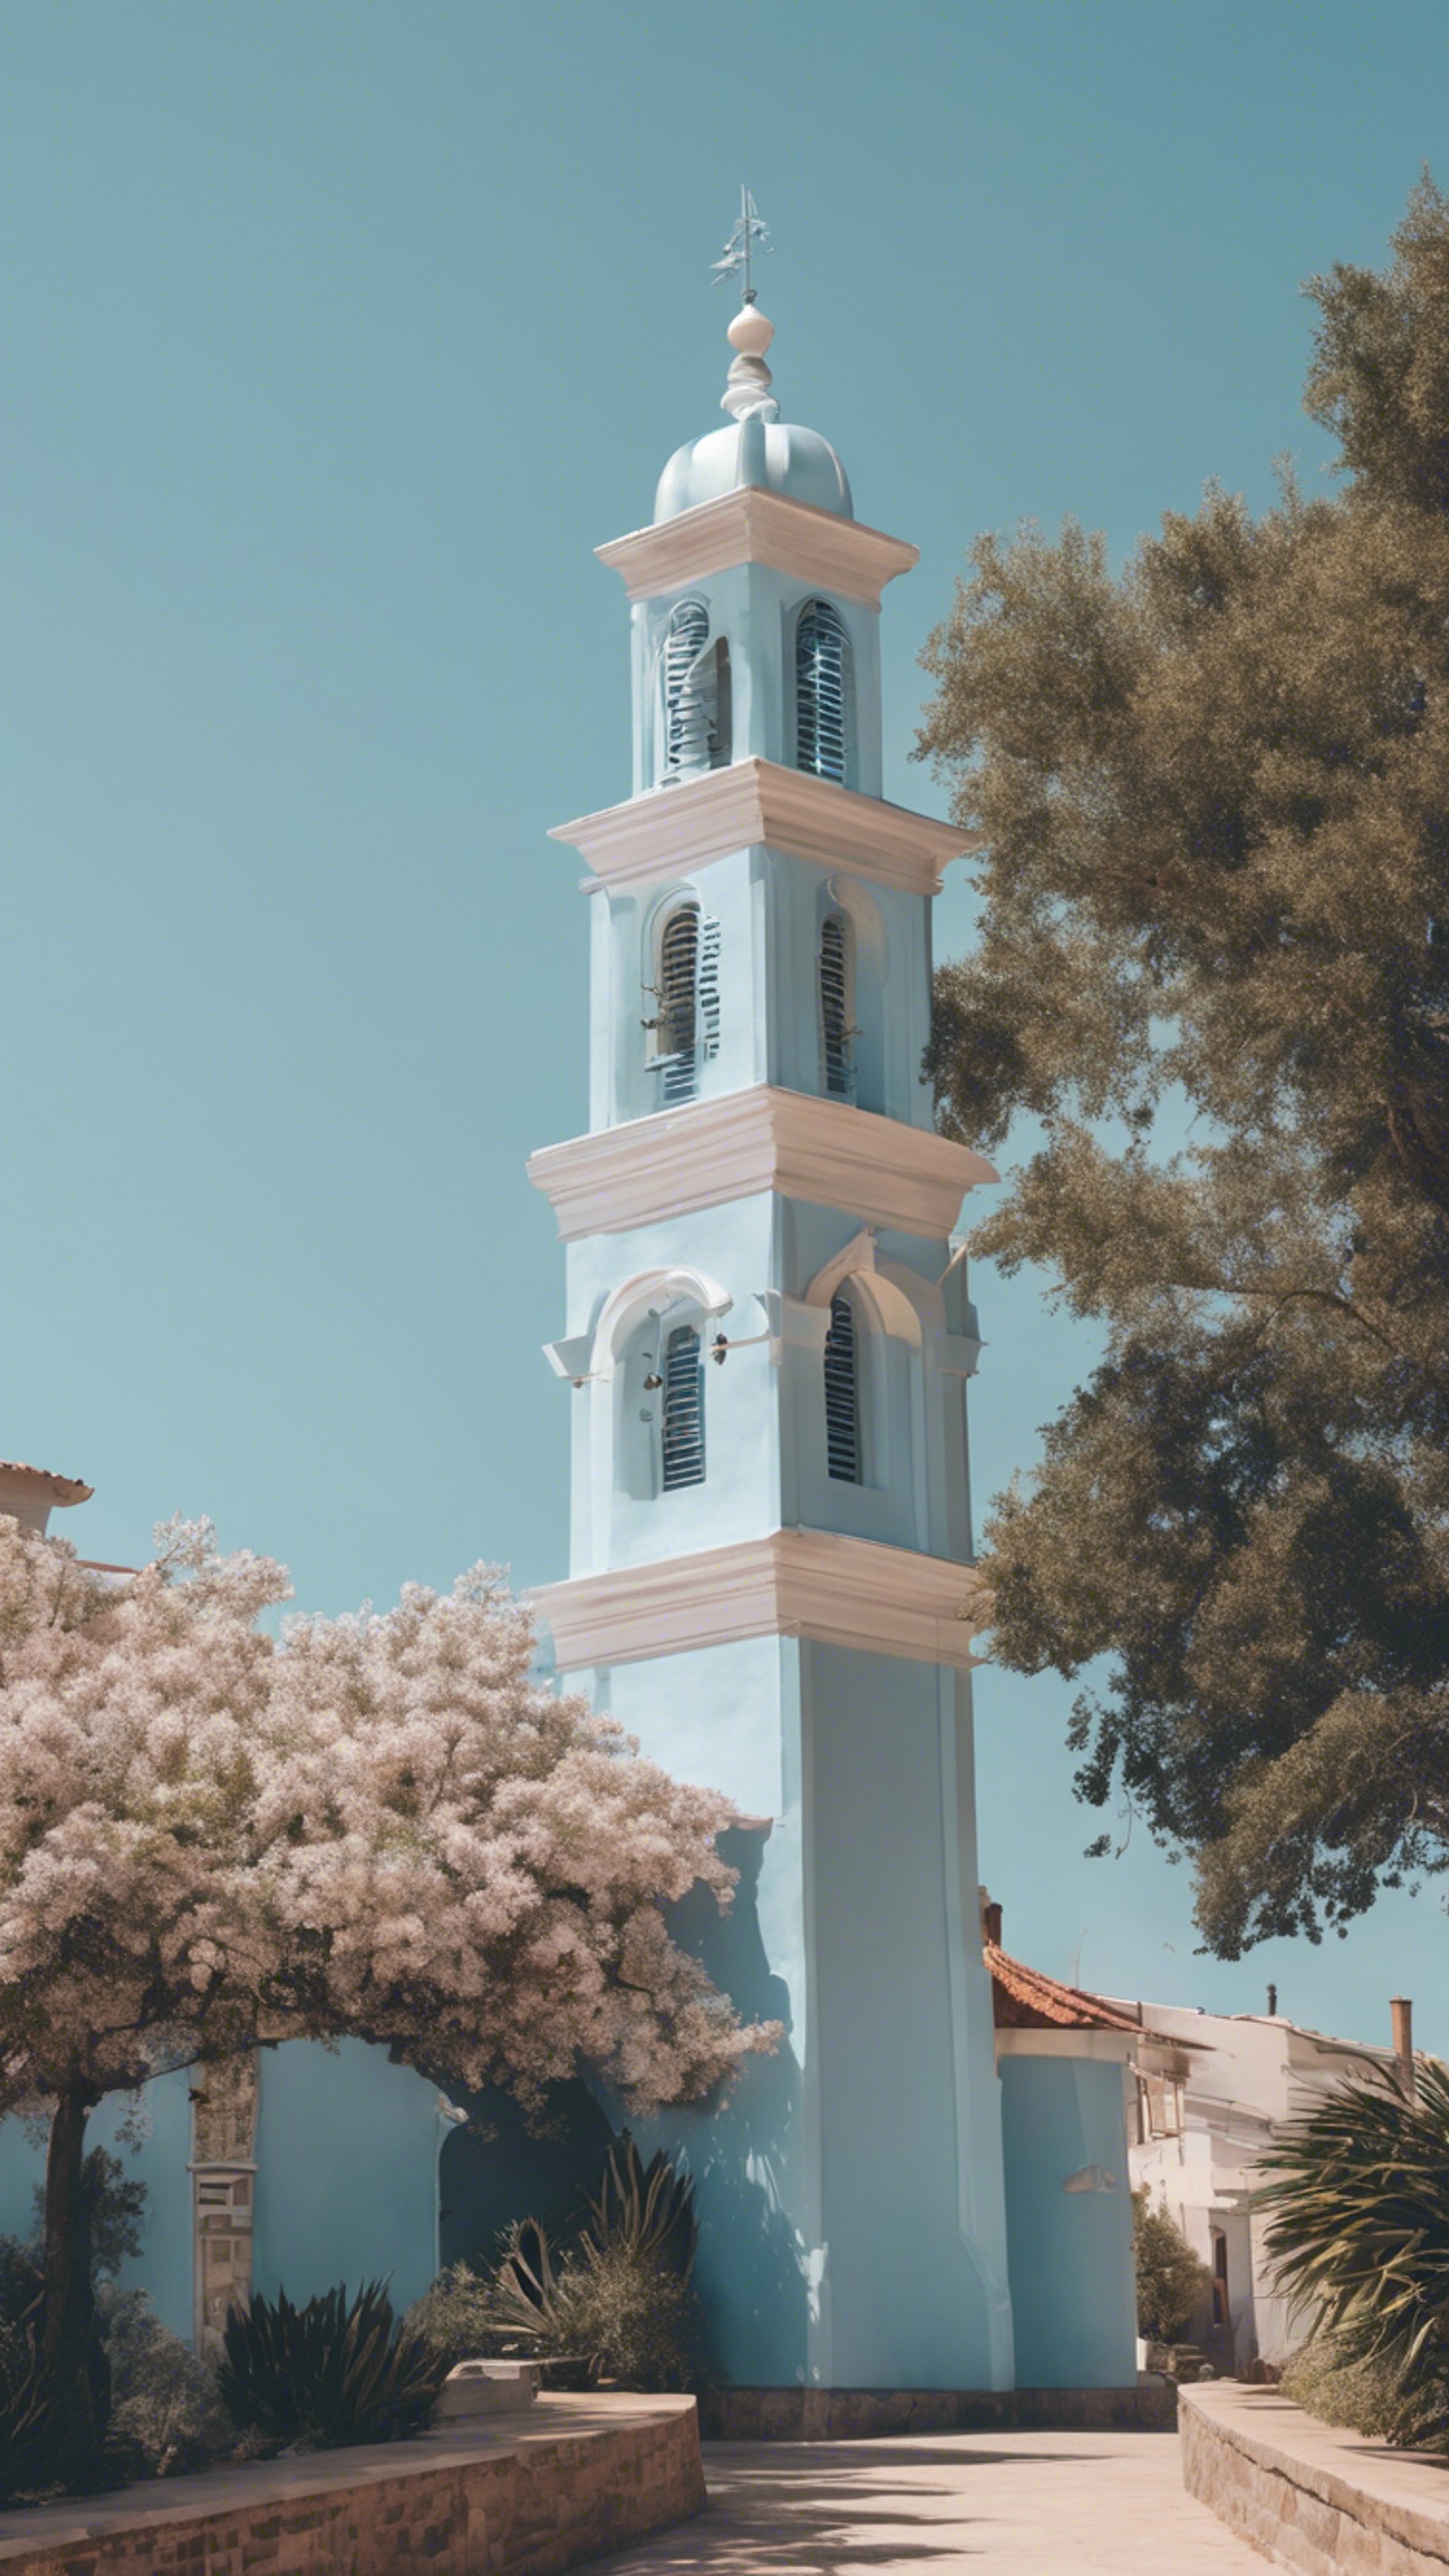 A stately pastel blue bell tower against a clear, sunny sky in a coastal town. 벽지[a05c52dcc3054b35b6be]